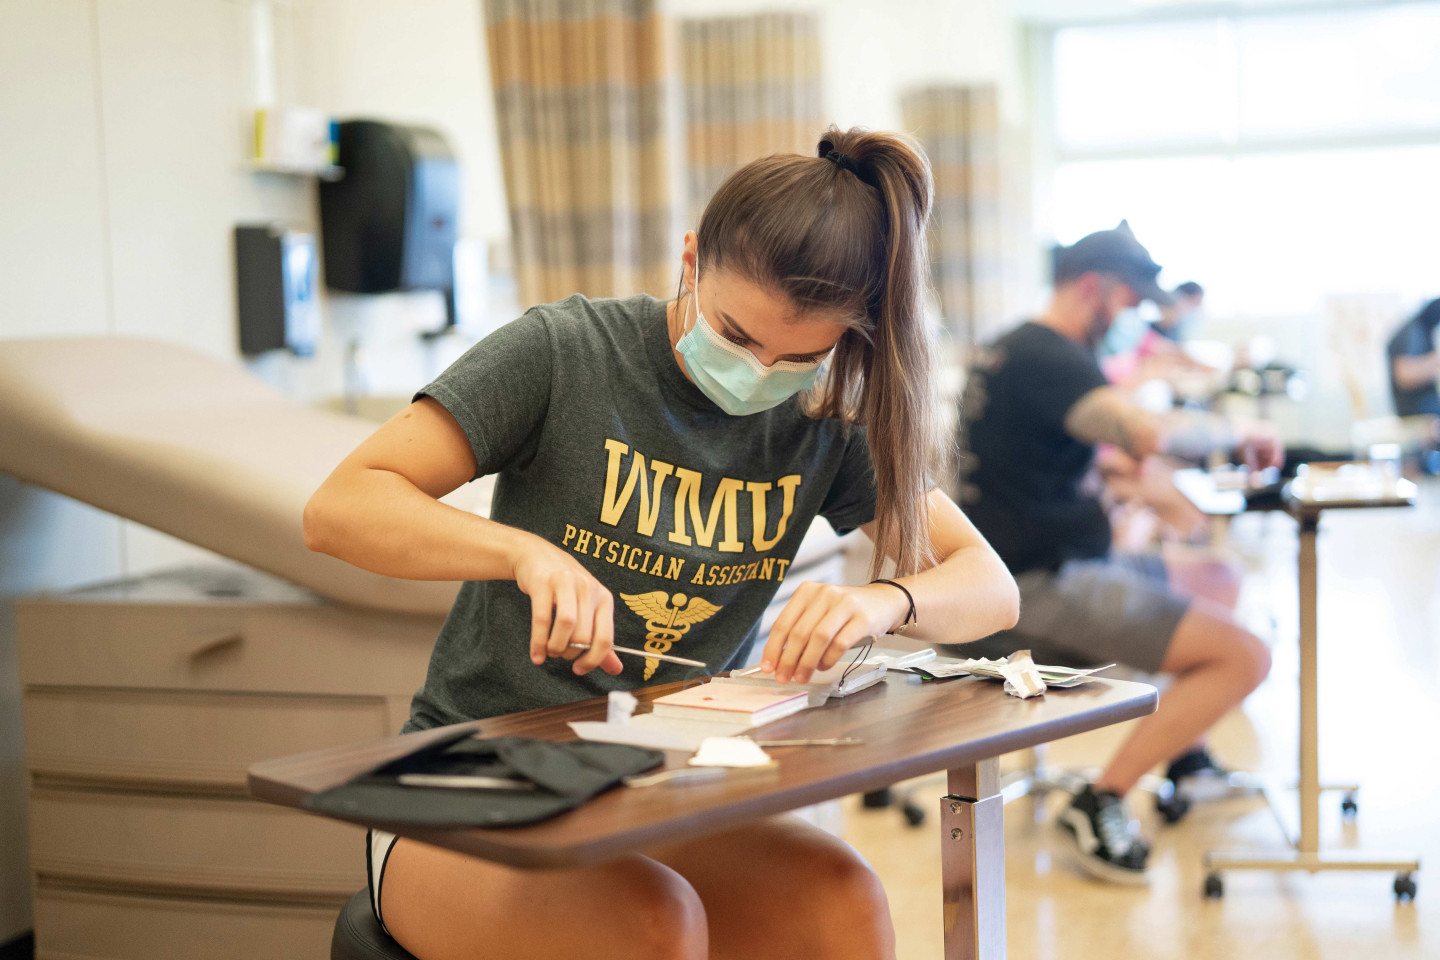 A physician assistant student sits at a desk and practices suturing.